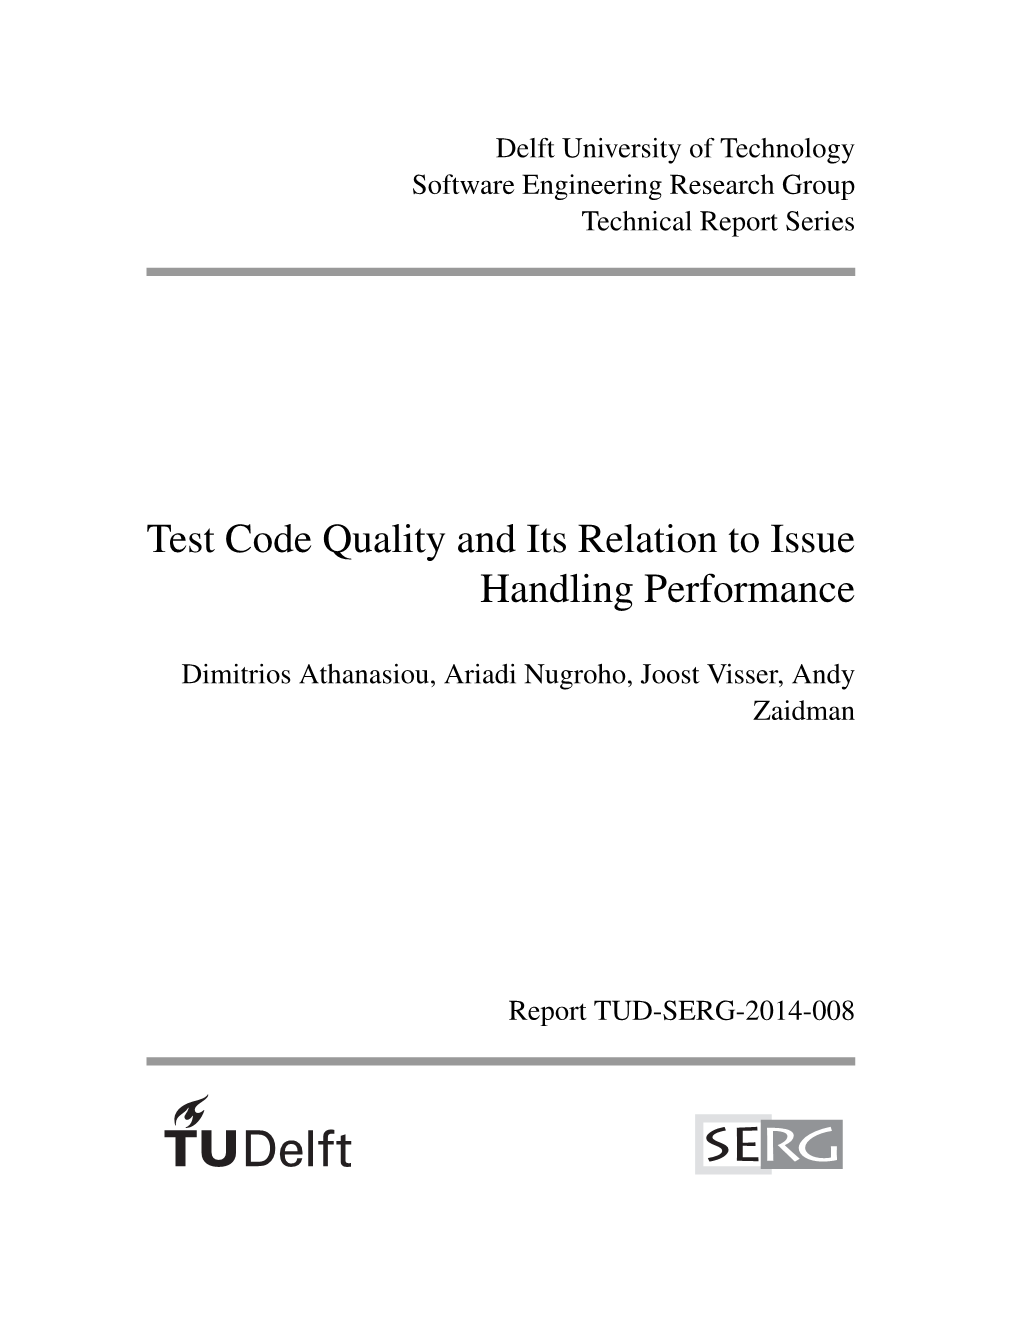 Test Code Quality and Its Relation to Issue Handling Performance